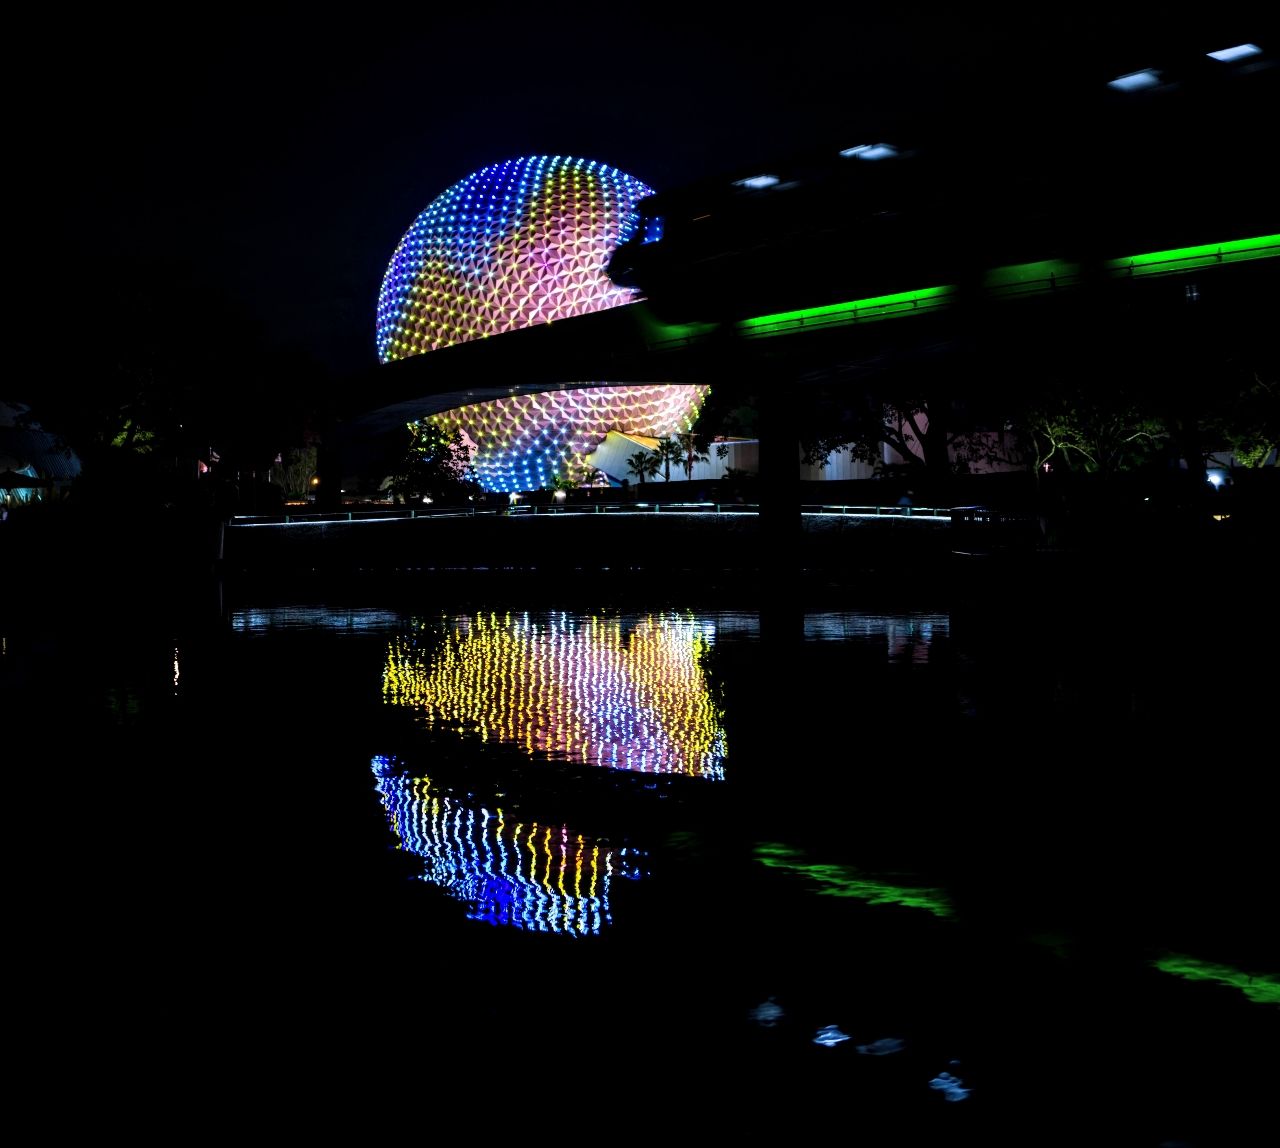 Spaceship Earth - From The Land Gardens, United States